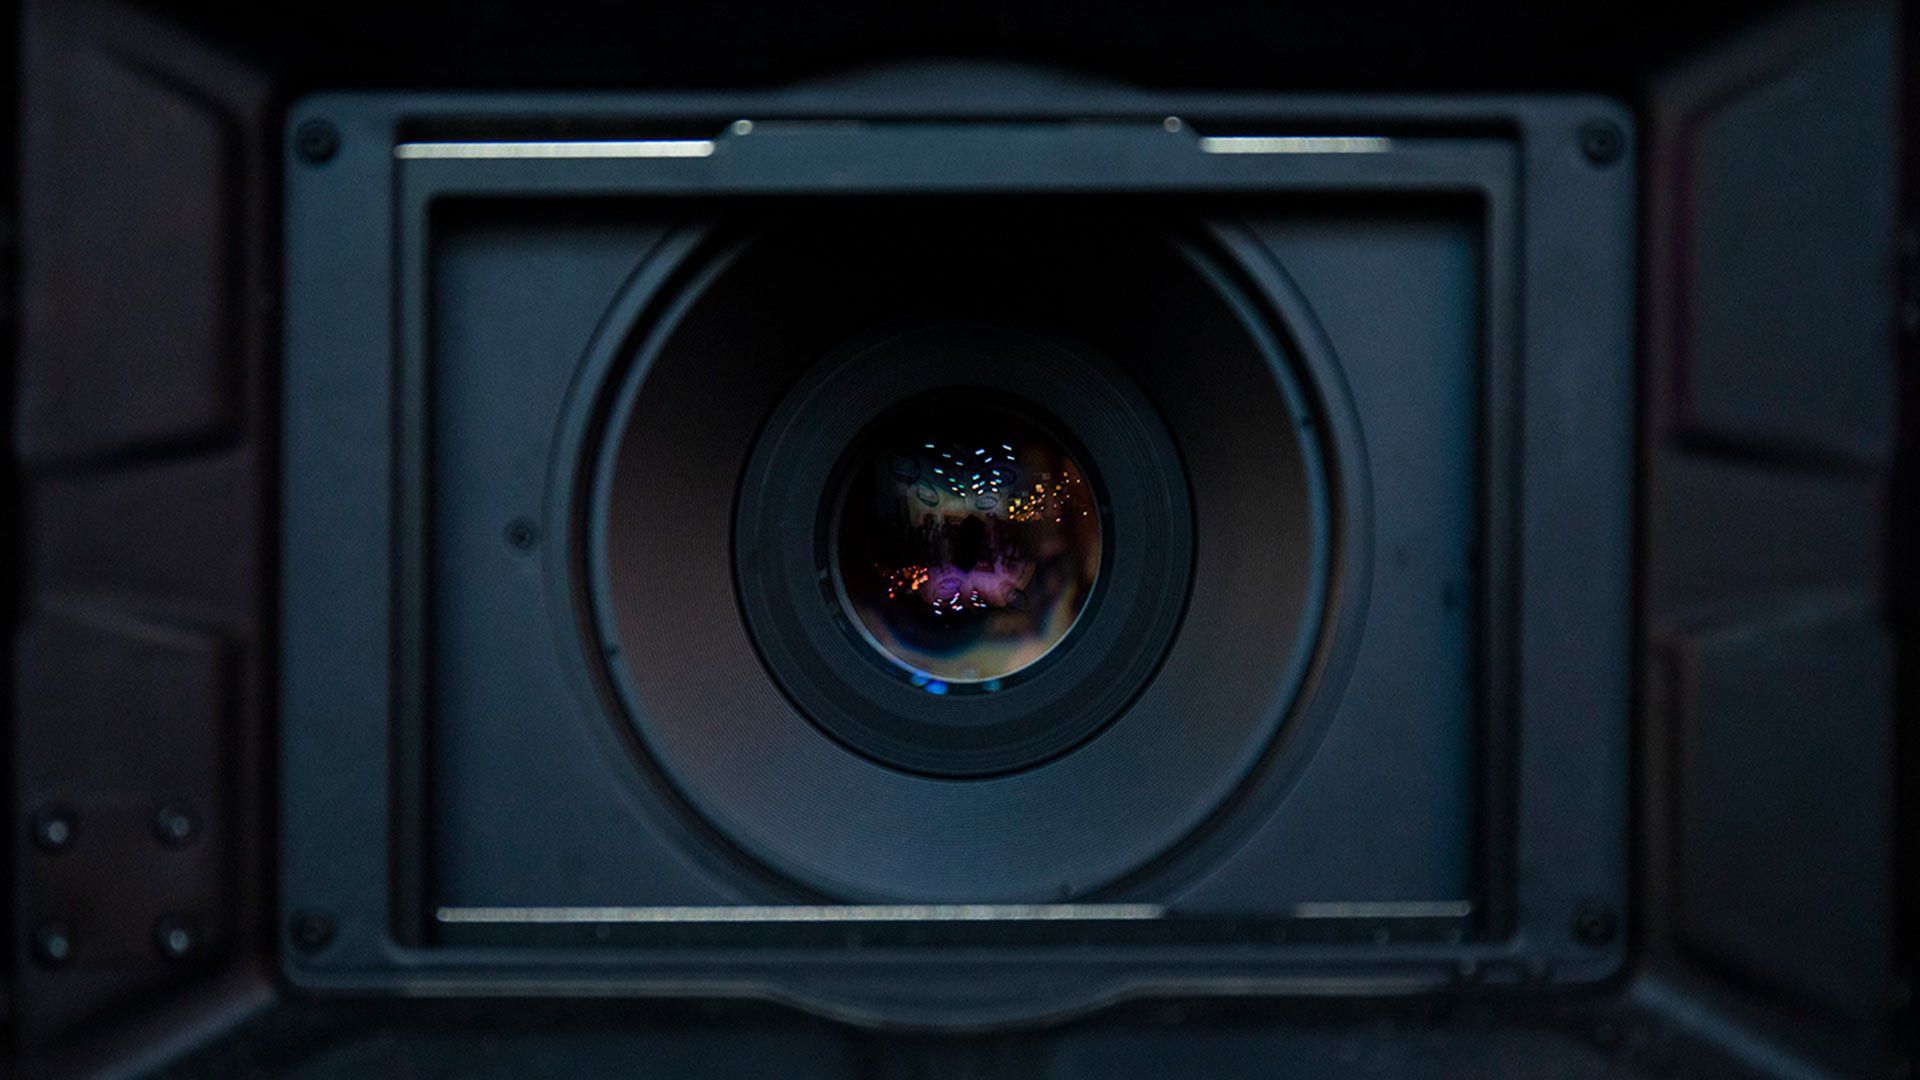 Looking down the barrel of a lens